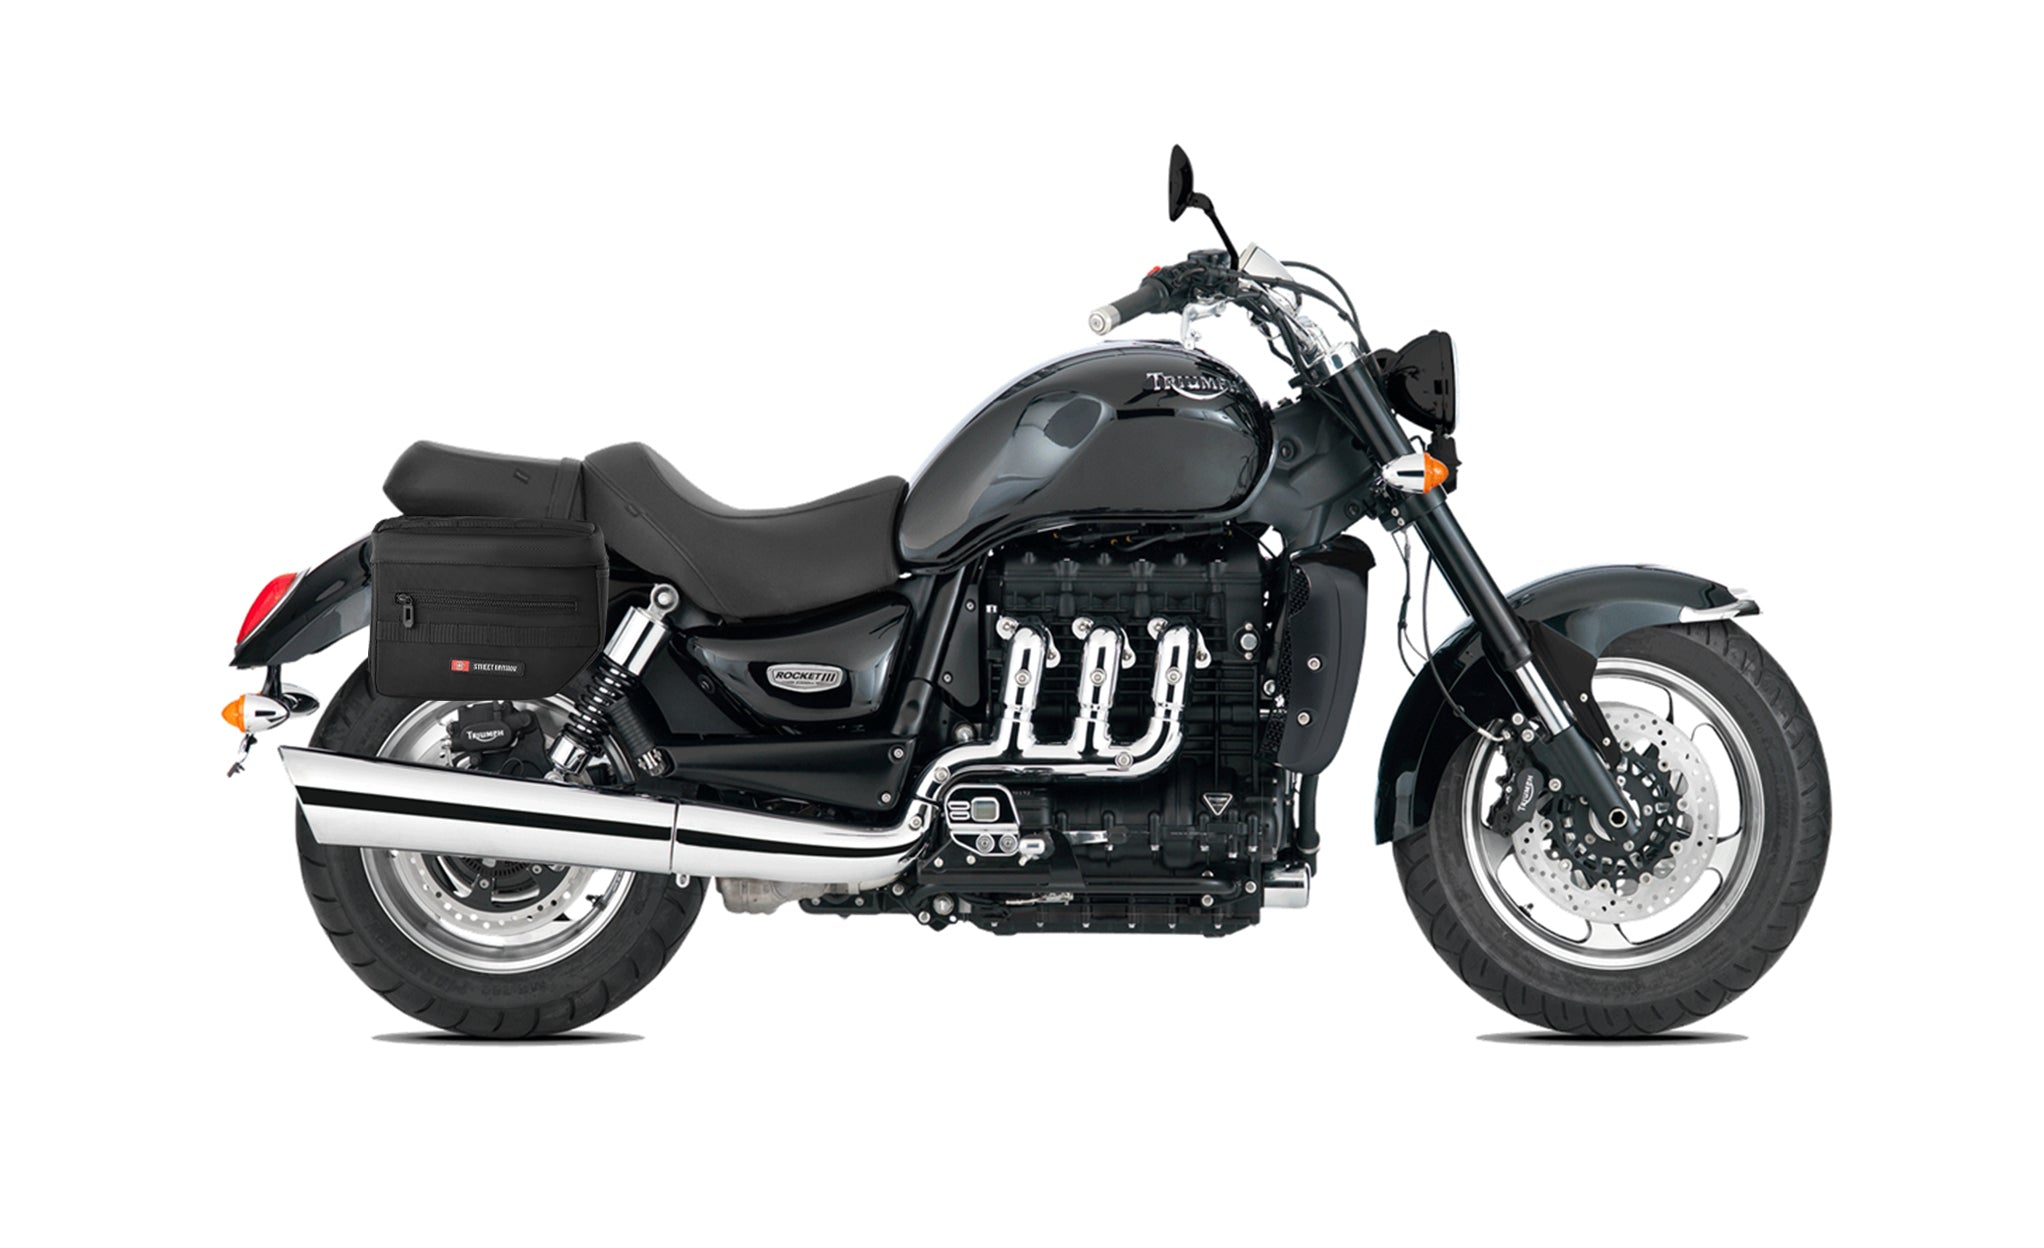 Viking Patriot Small Triumph Rocket Iii Roadster Motorcycle Throw Over Saddlebags on Bike Photo @expand